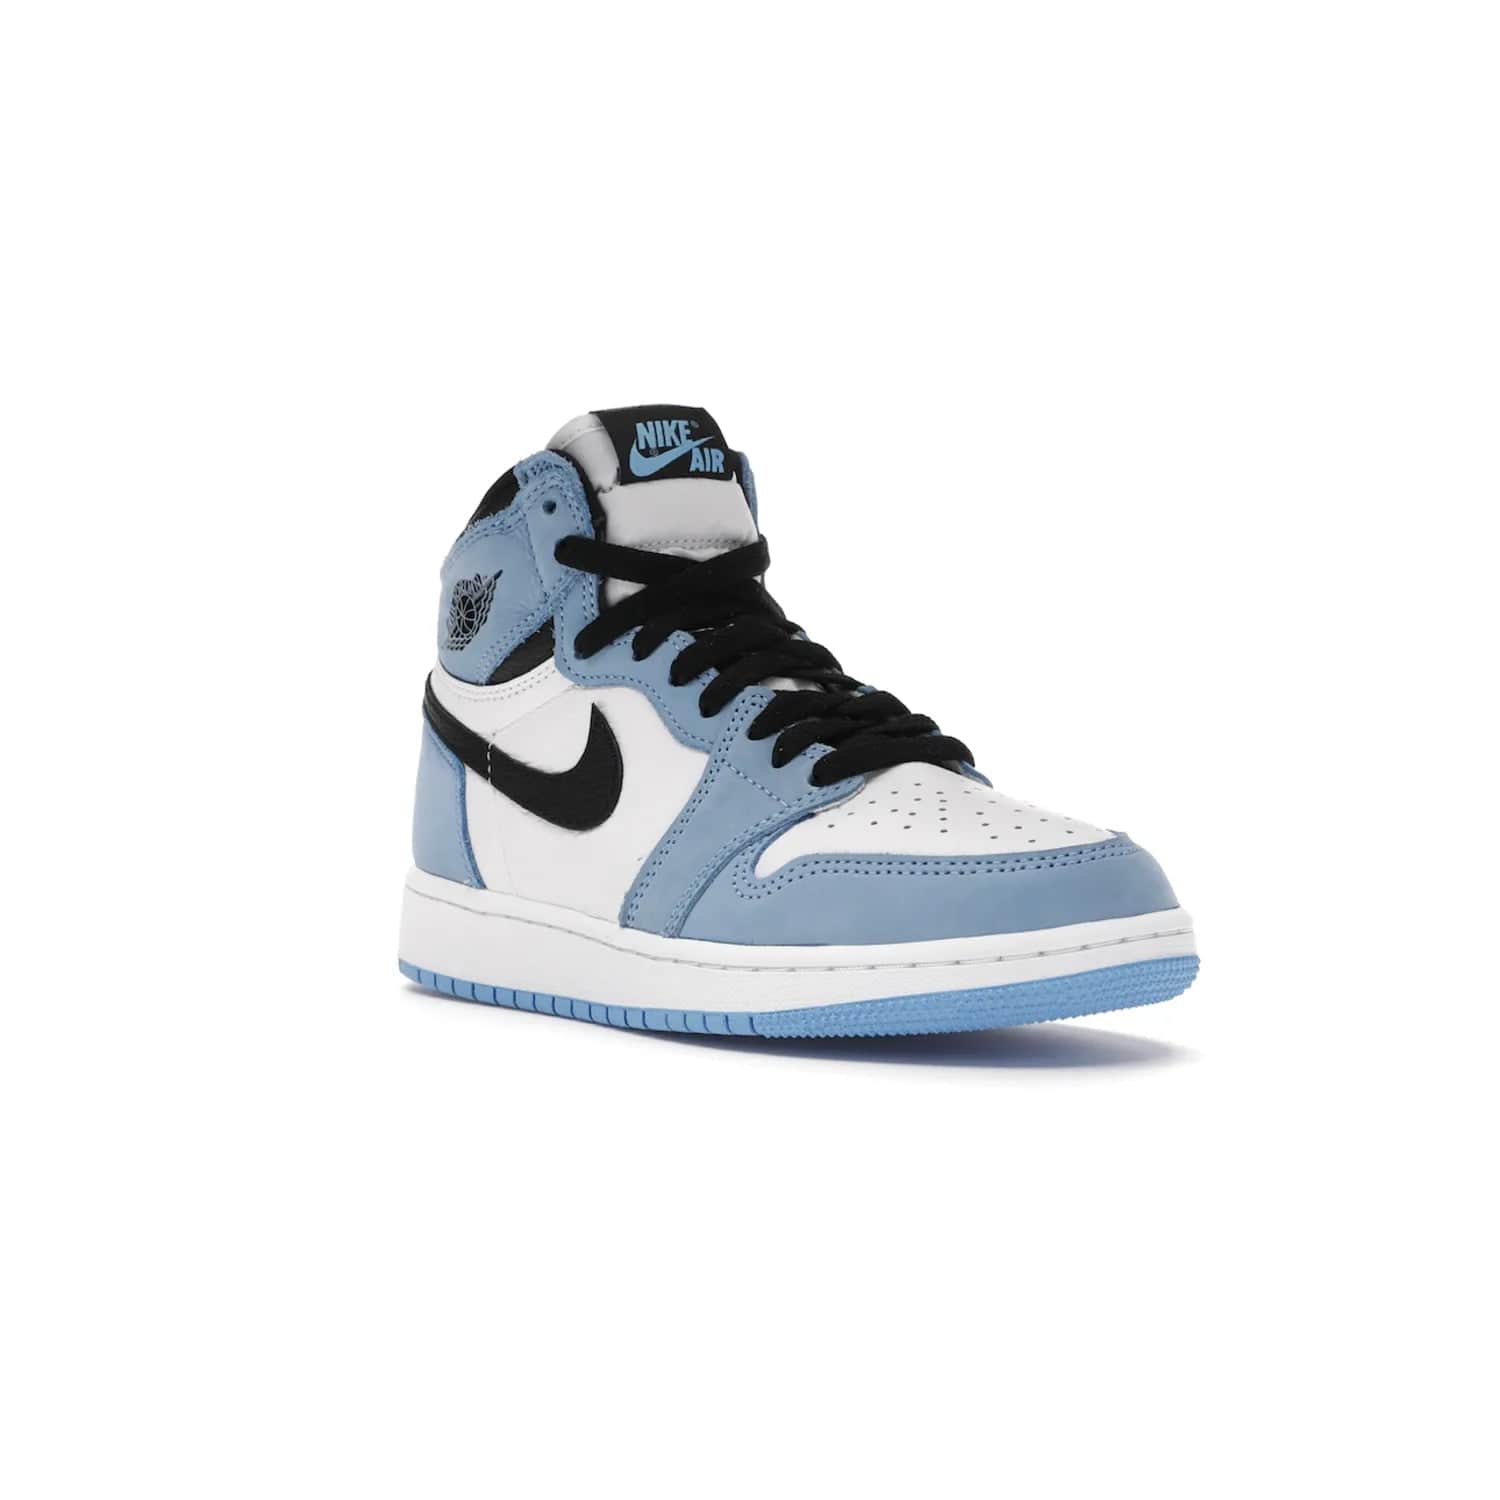 Jordan 1 Retro High White University Blue Black (GS) - Image 6 - Only at www.BallersClubKickz.com - Air Jordan 1 Retro High White University Blue Black GS: the latest offering from the iconic Air Jordan 1 line. White tumbled leather upper with University Blue overlays and black detailing. University Blue outsole and white midsole. March 6 release.